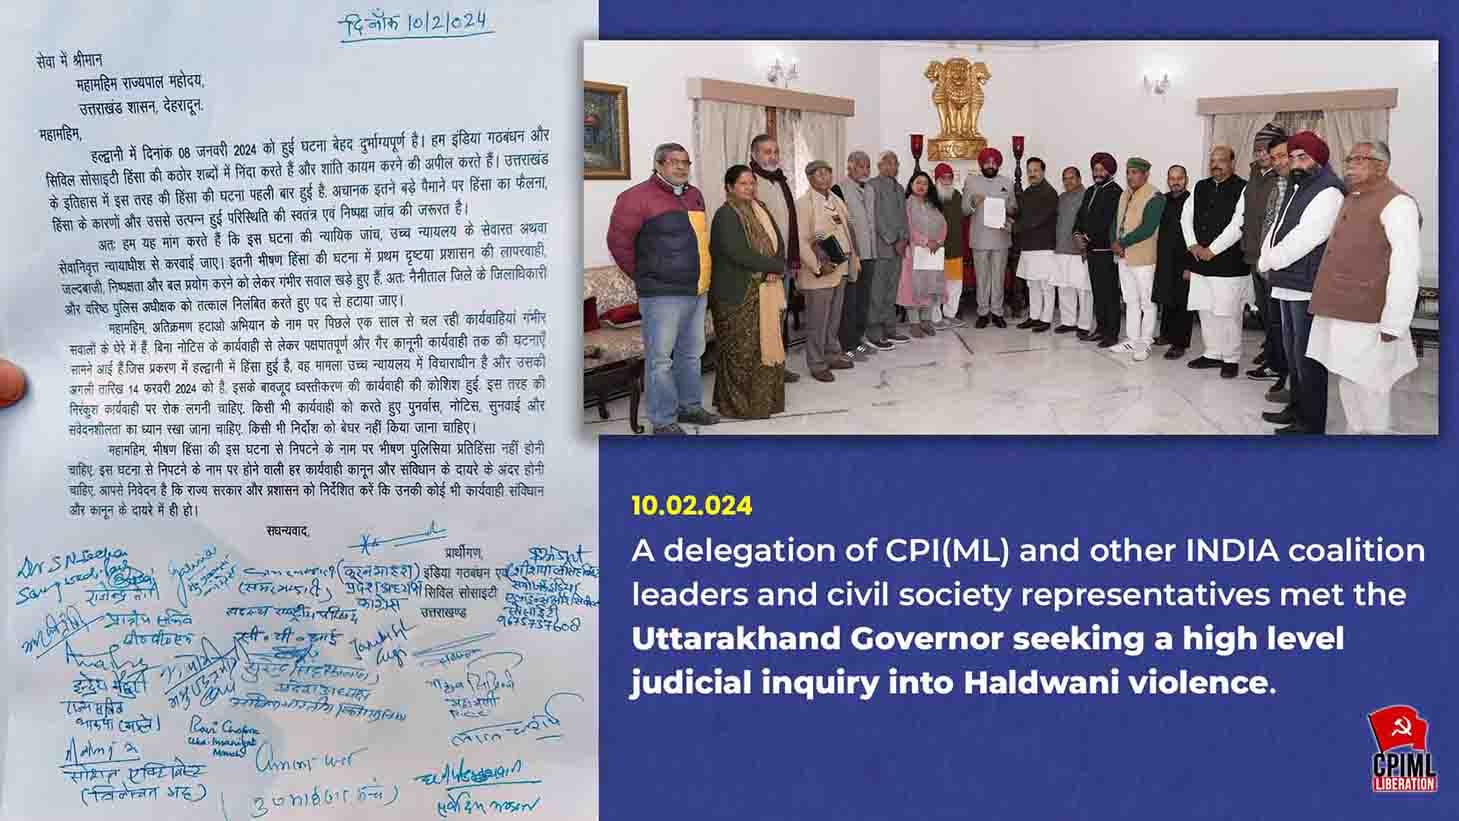 CPIML and other INDIA Coalition Leaders Meets Uttarakhand Governor